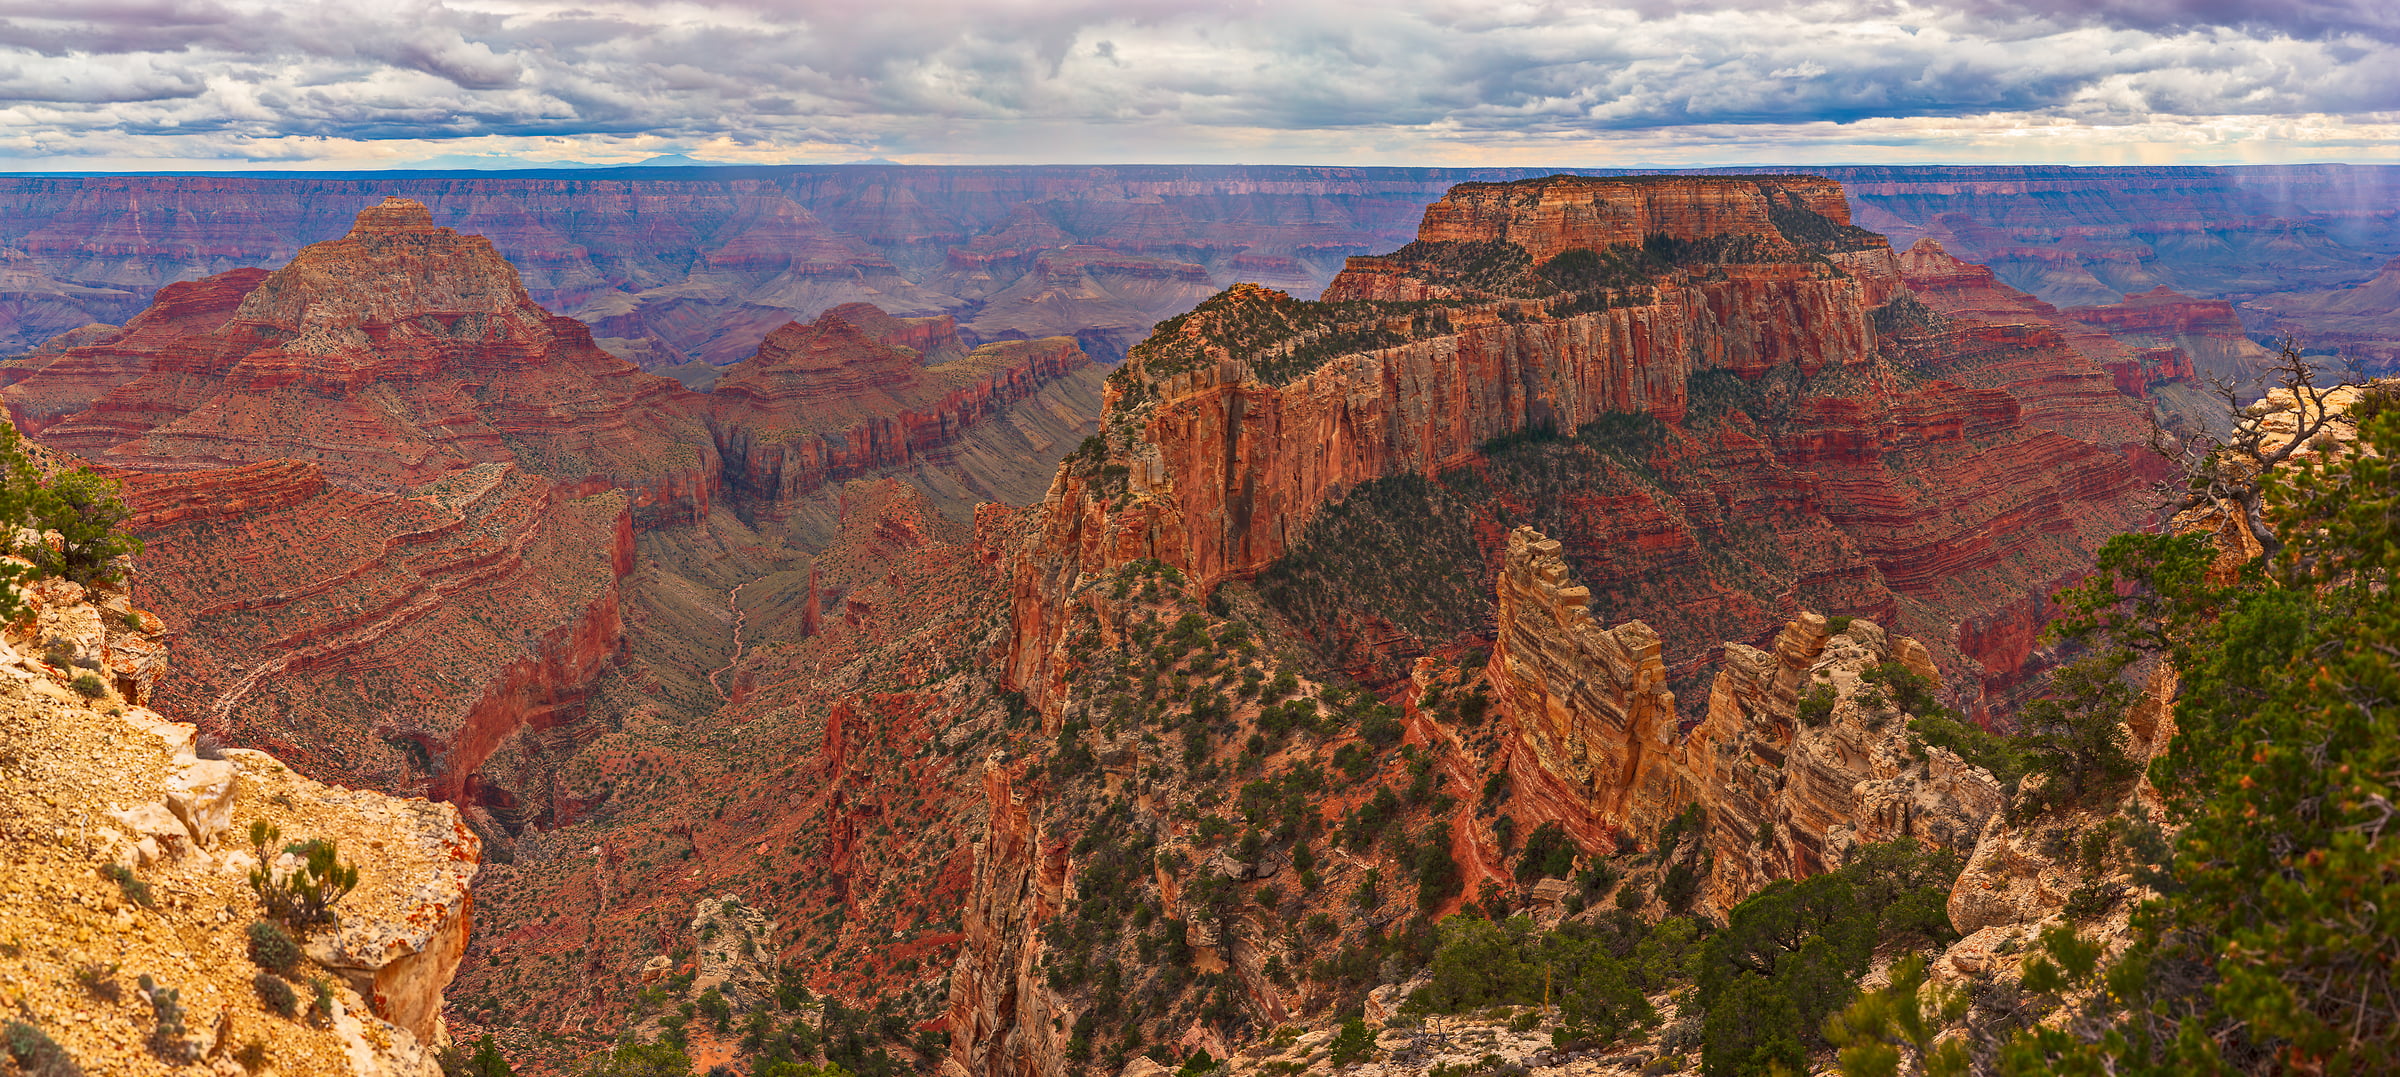 4,257 megapixels! A very high resolution, large-format VAST image of the Grand Canyon from Cape Royal; landscape photograph created by John Freeman.